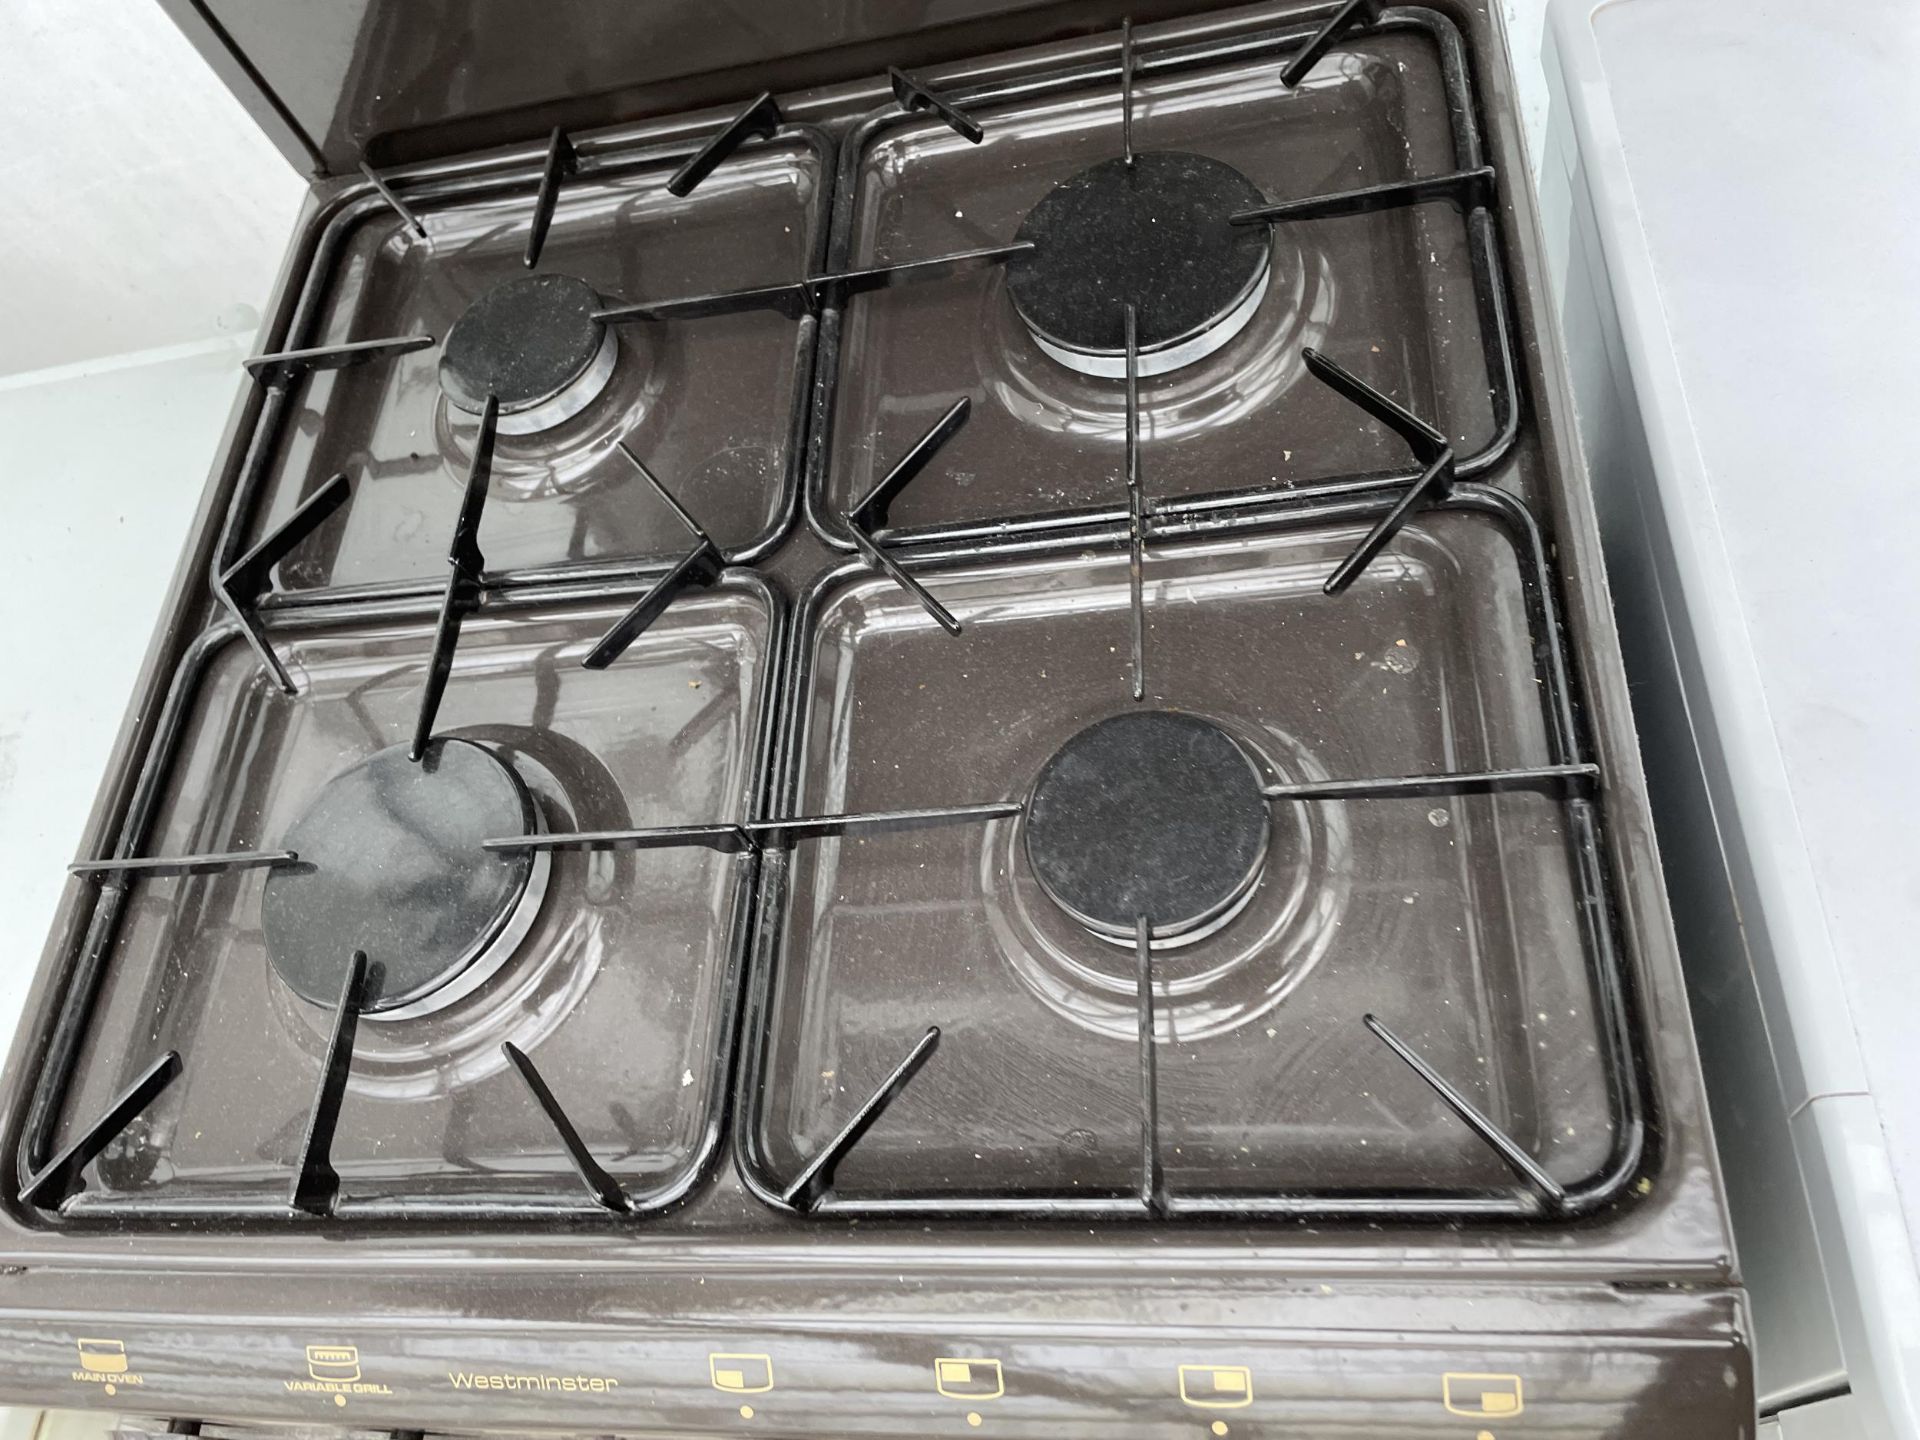 A BLACK CANON FREESTANDING OVEN AND HOB - Image 5 of 5